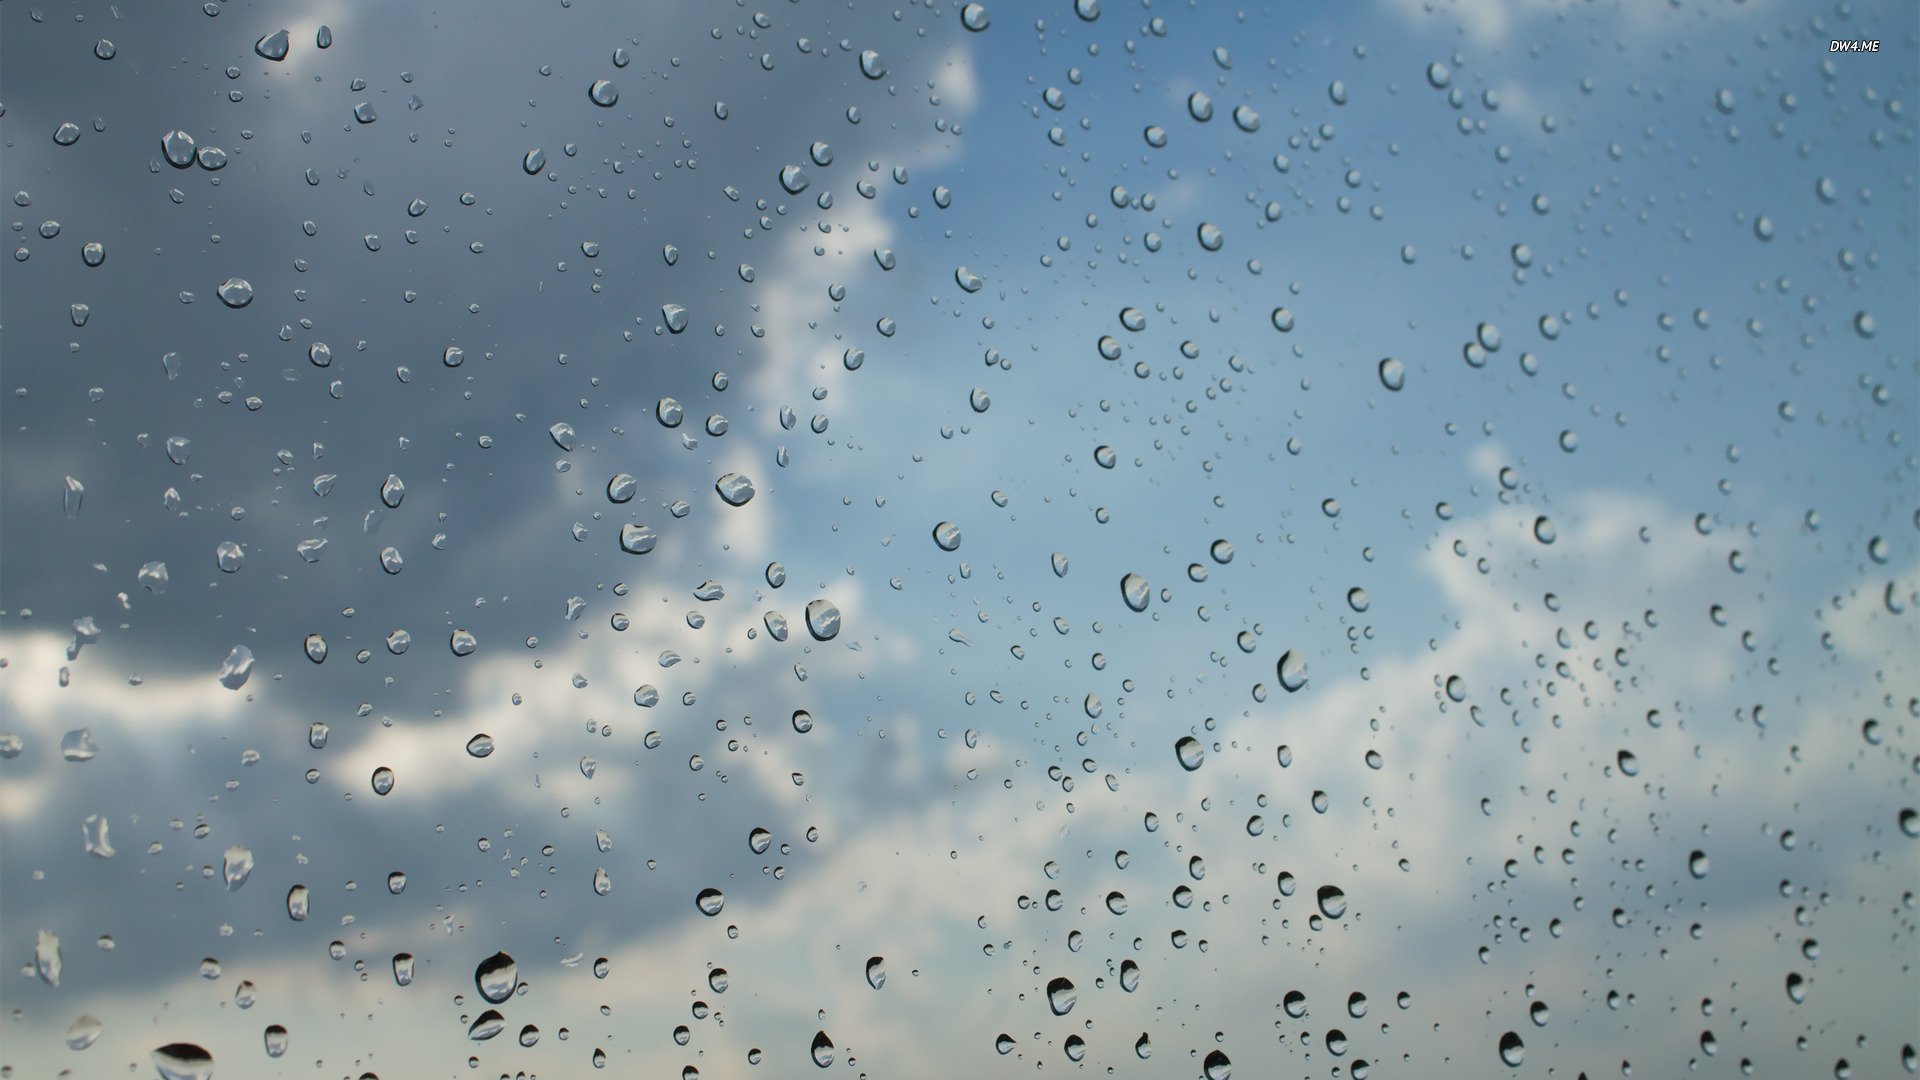 Raindrops and clouds wallpaper   Photography wallpapers   584